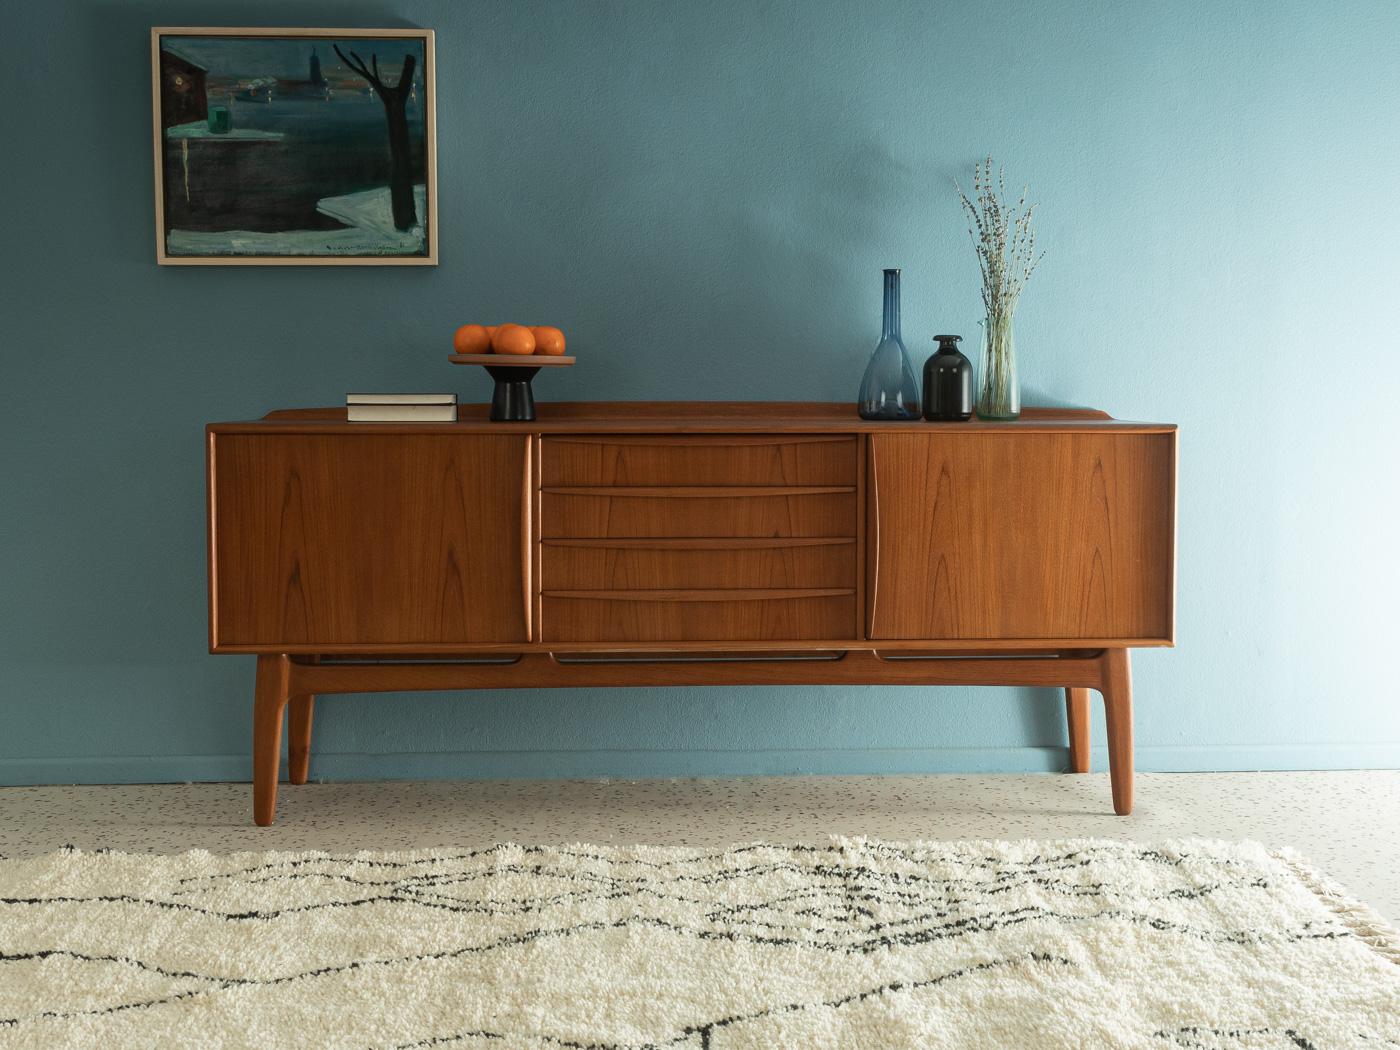 Classic sideboard from the 1960s by Svend Åge Madsen for Knudsen & Søn. Corpus in teak veneer with two sliding doors, two shelves, four drawers and slanted feet.

Quality Features:
- accomplished design: perfect proportions and visible attention